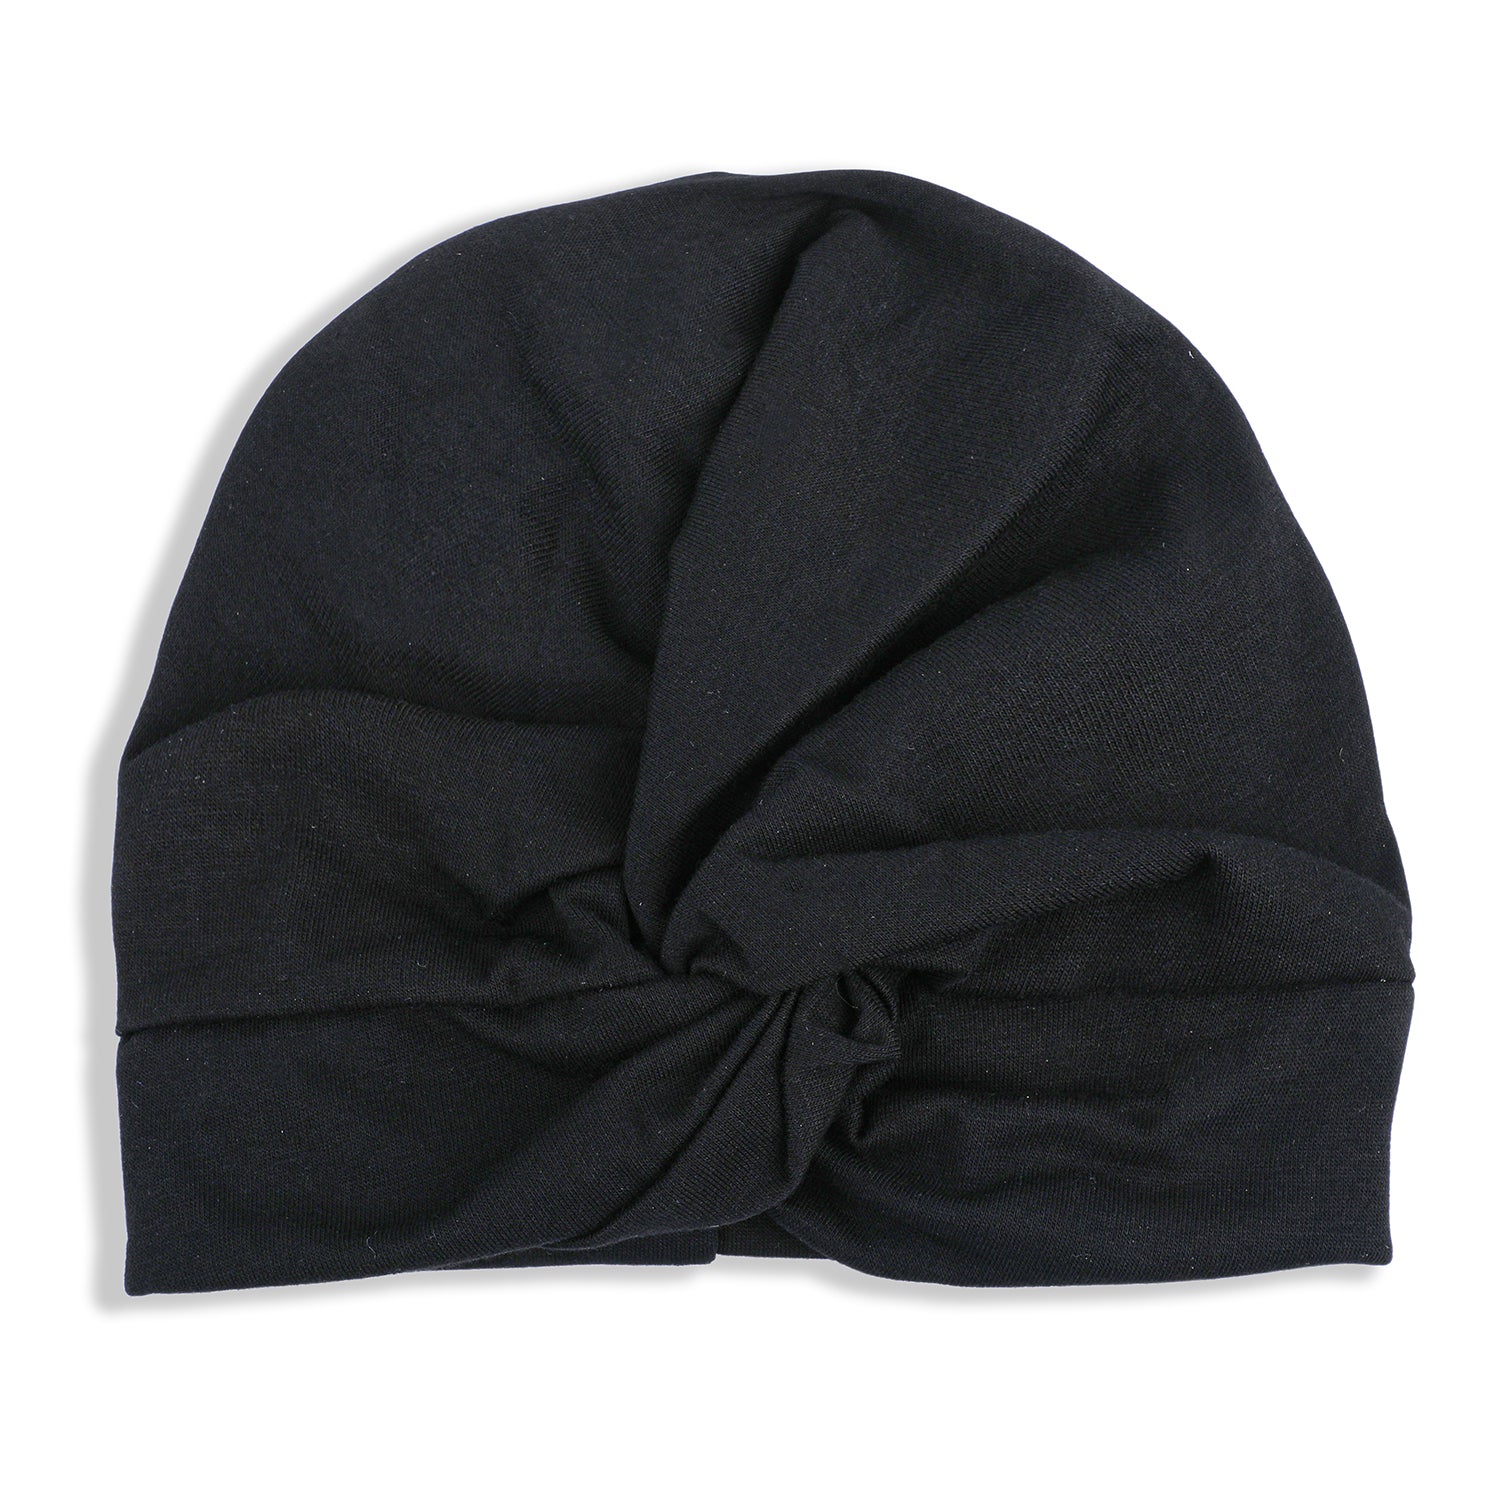 Baby Moo Cute Knotted Turban Cap Infant Beanie - Black - Baby Moo